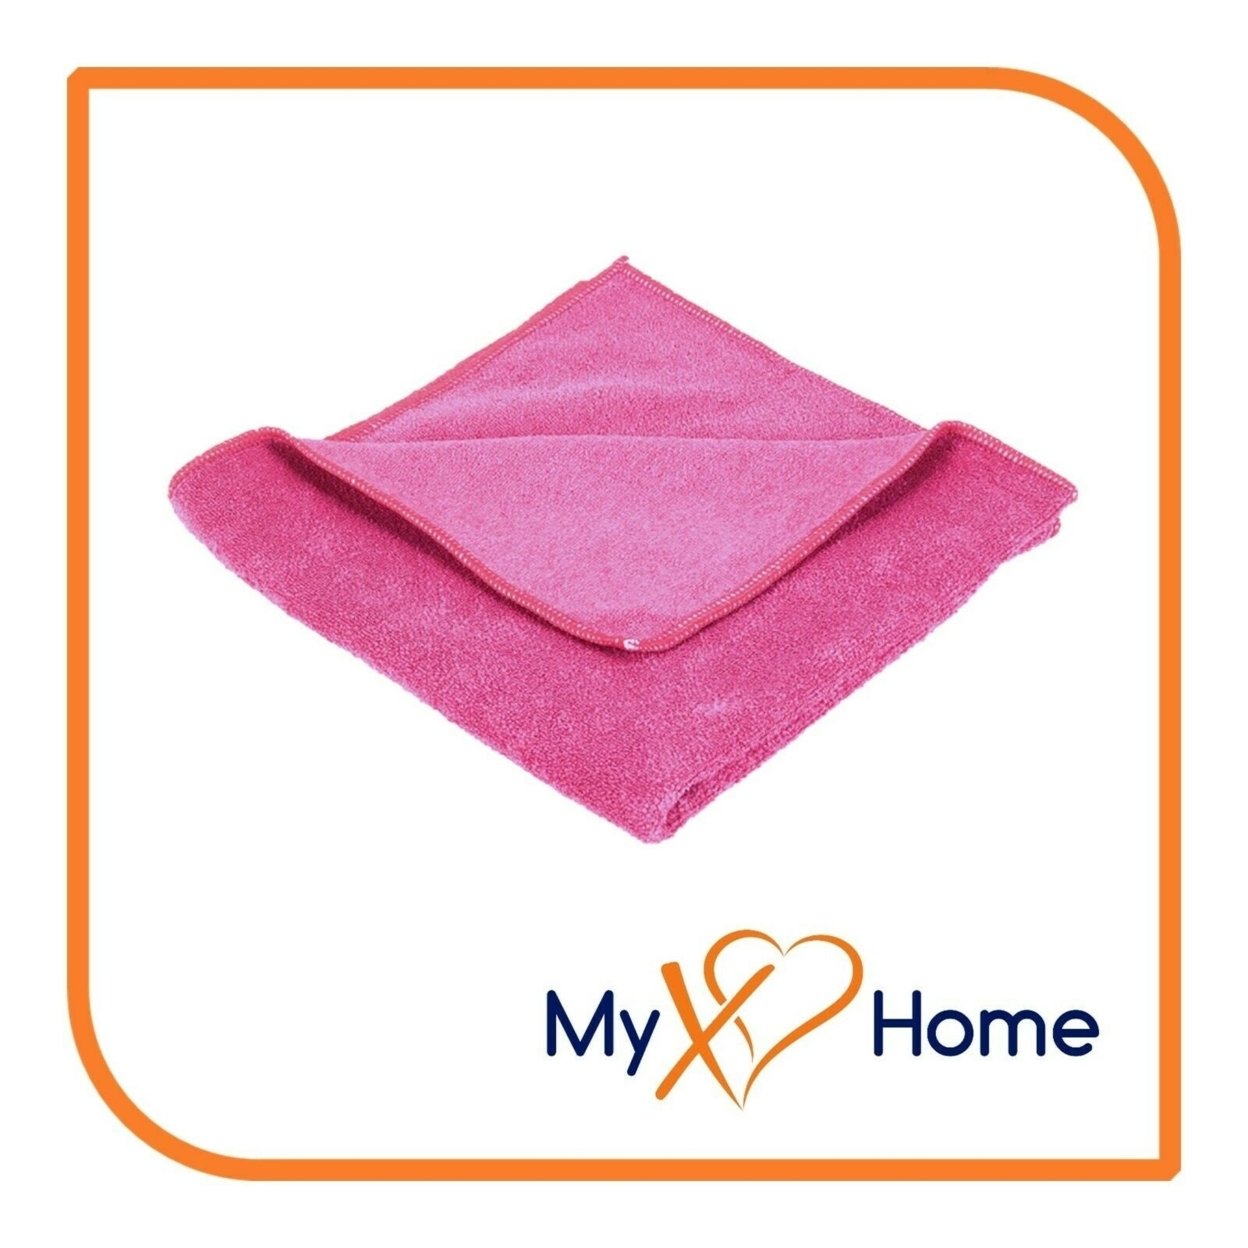 12 x 12 Pink Microfiber Towel by MyXOHome - h) 48 Towels, XOH-CLE-TOW-MIC-1215x48